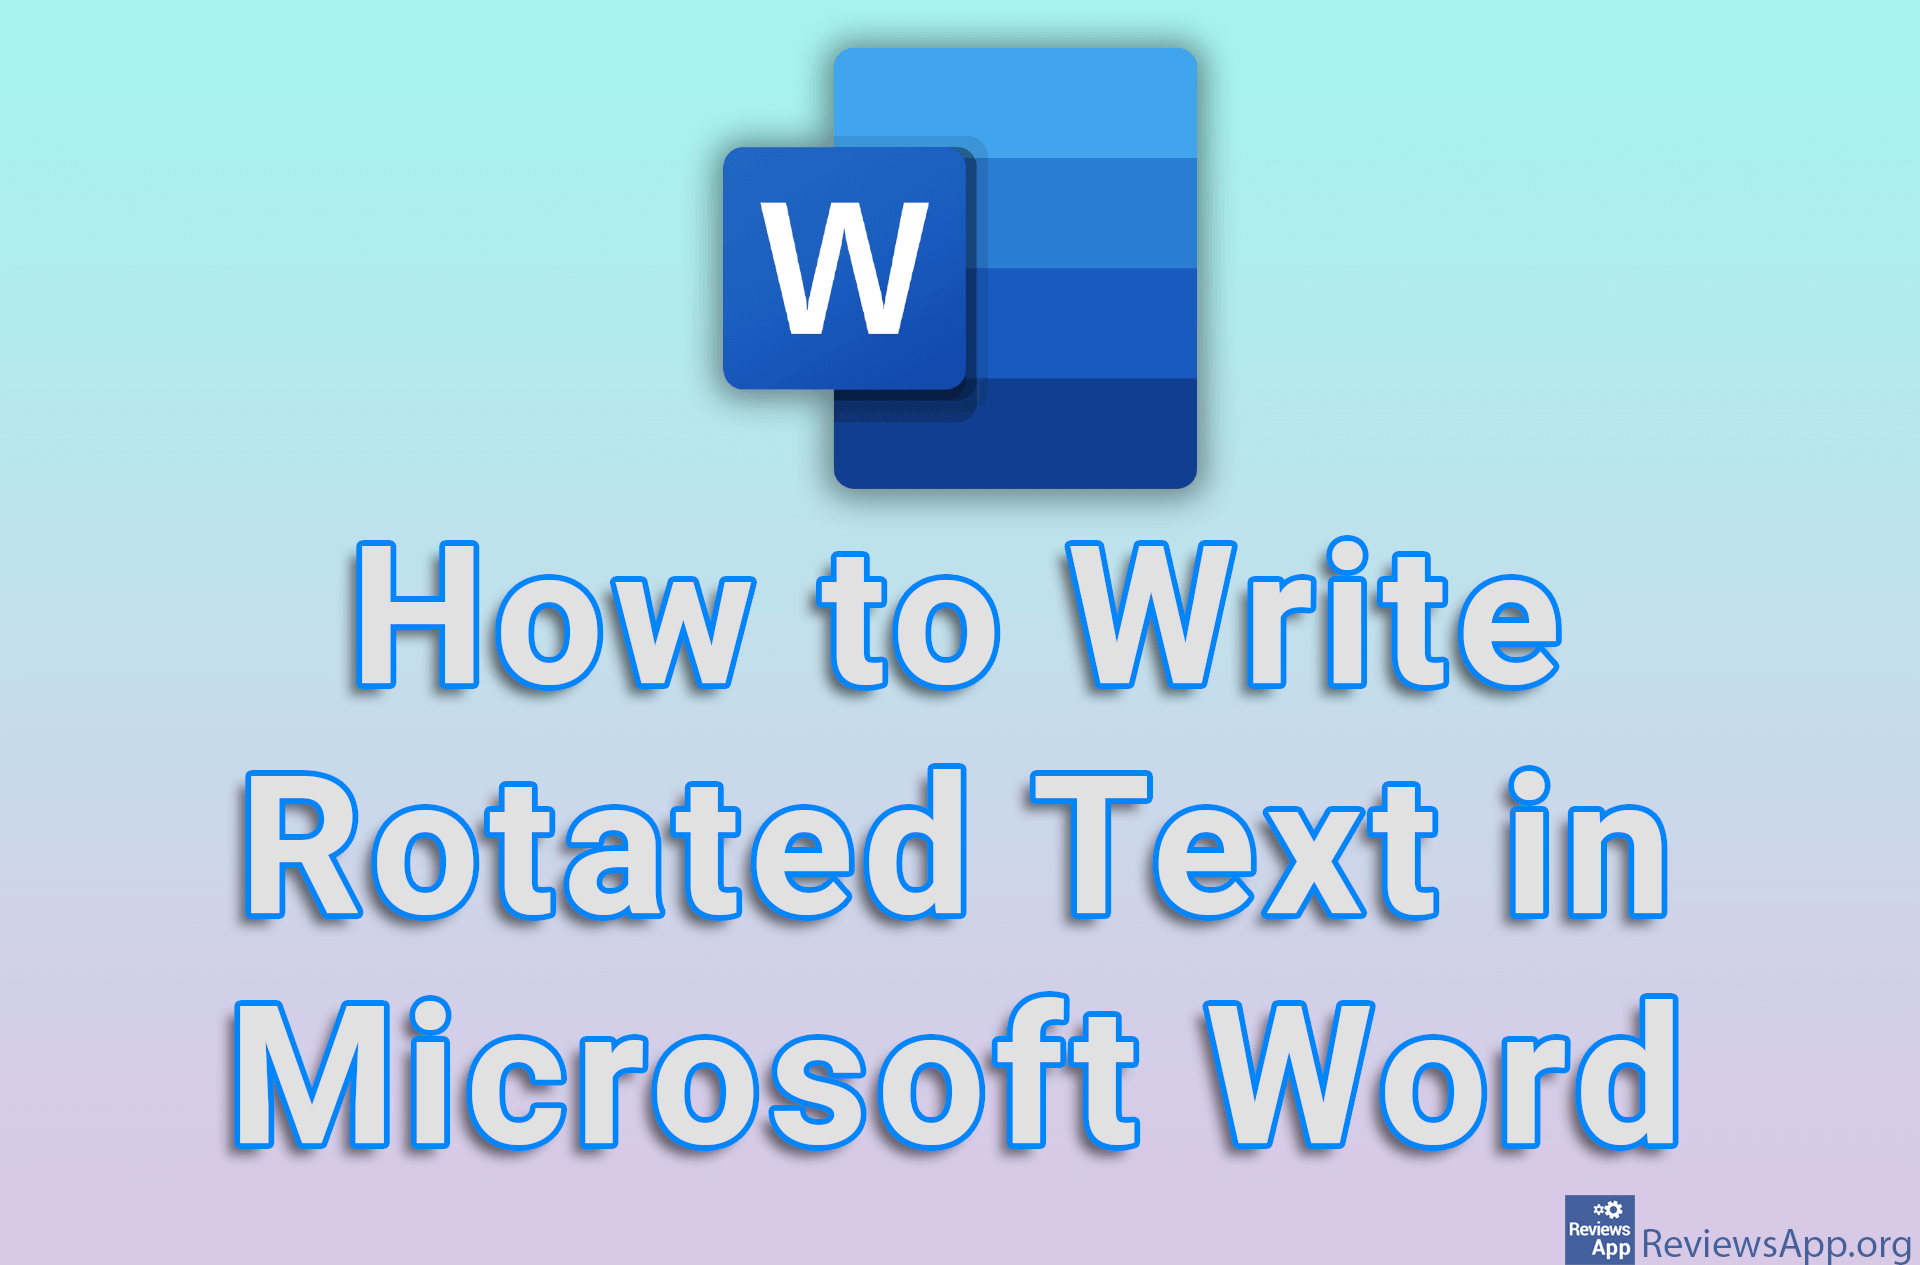 How to Write Rotated Text in Microsoft Word